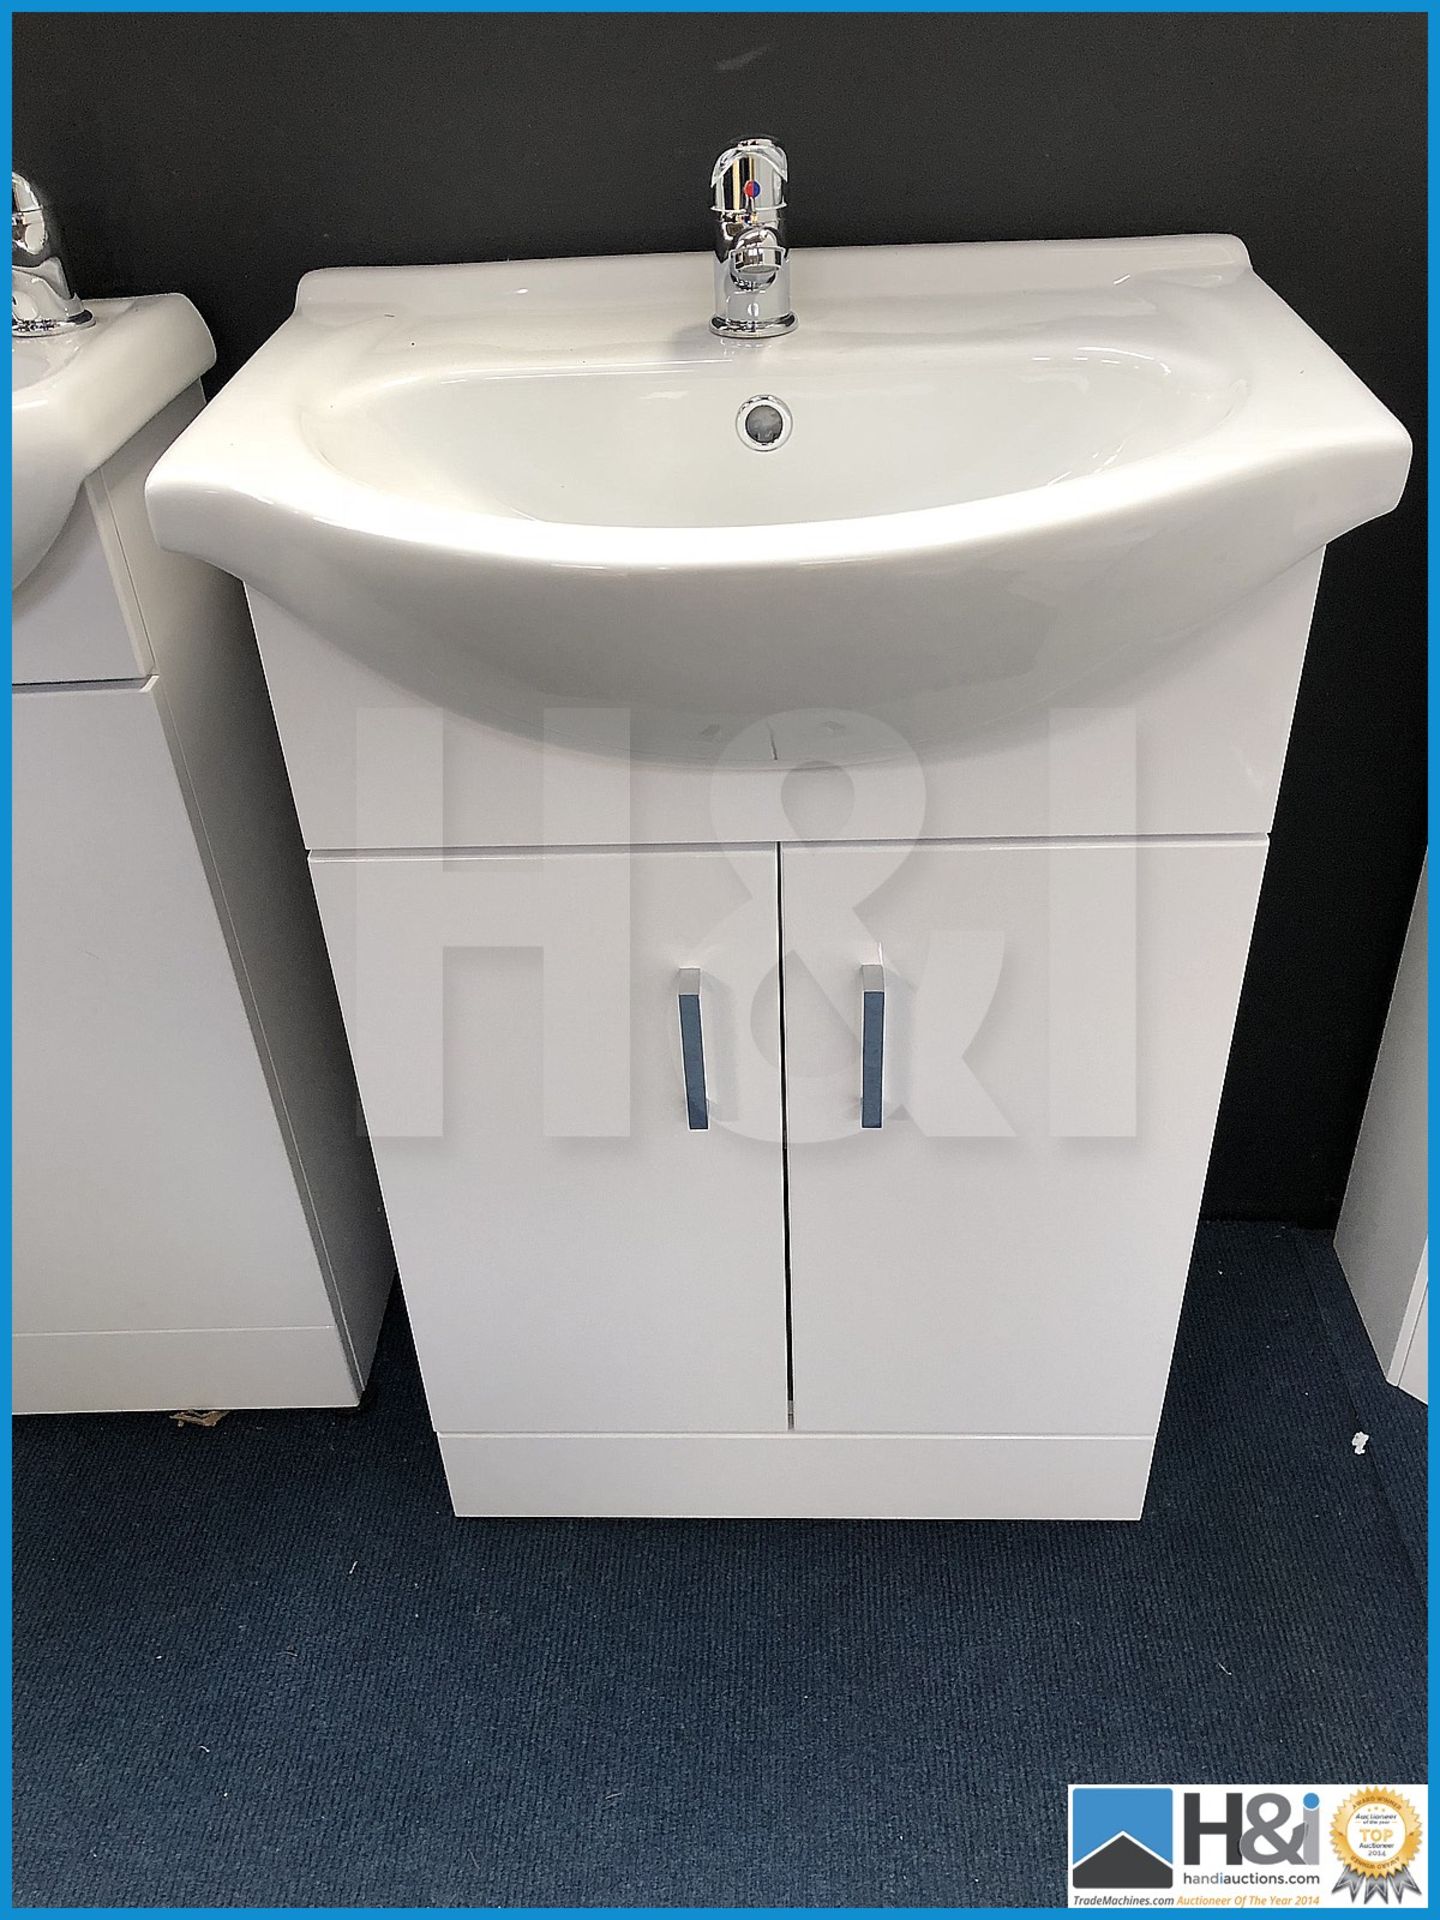 Ultra floor standing gloss white 500 wide vanity unit with ceramic basin and polished chrome V05 mon